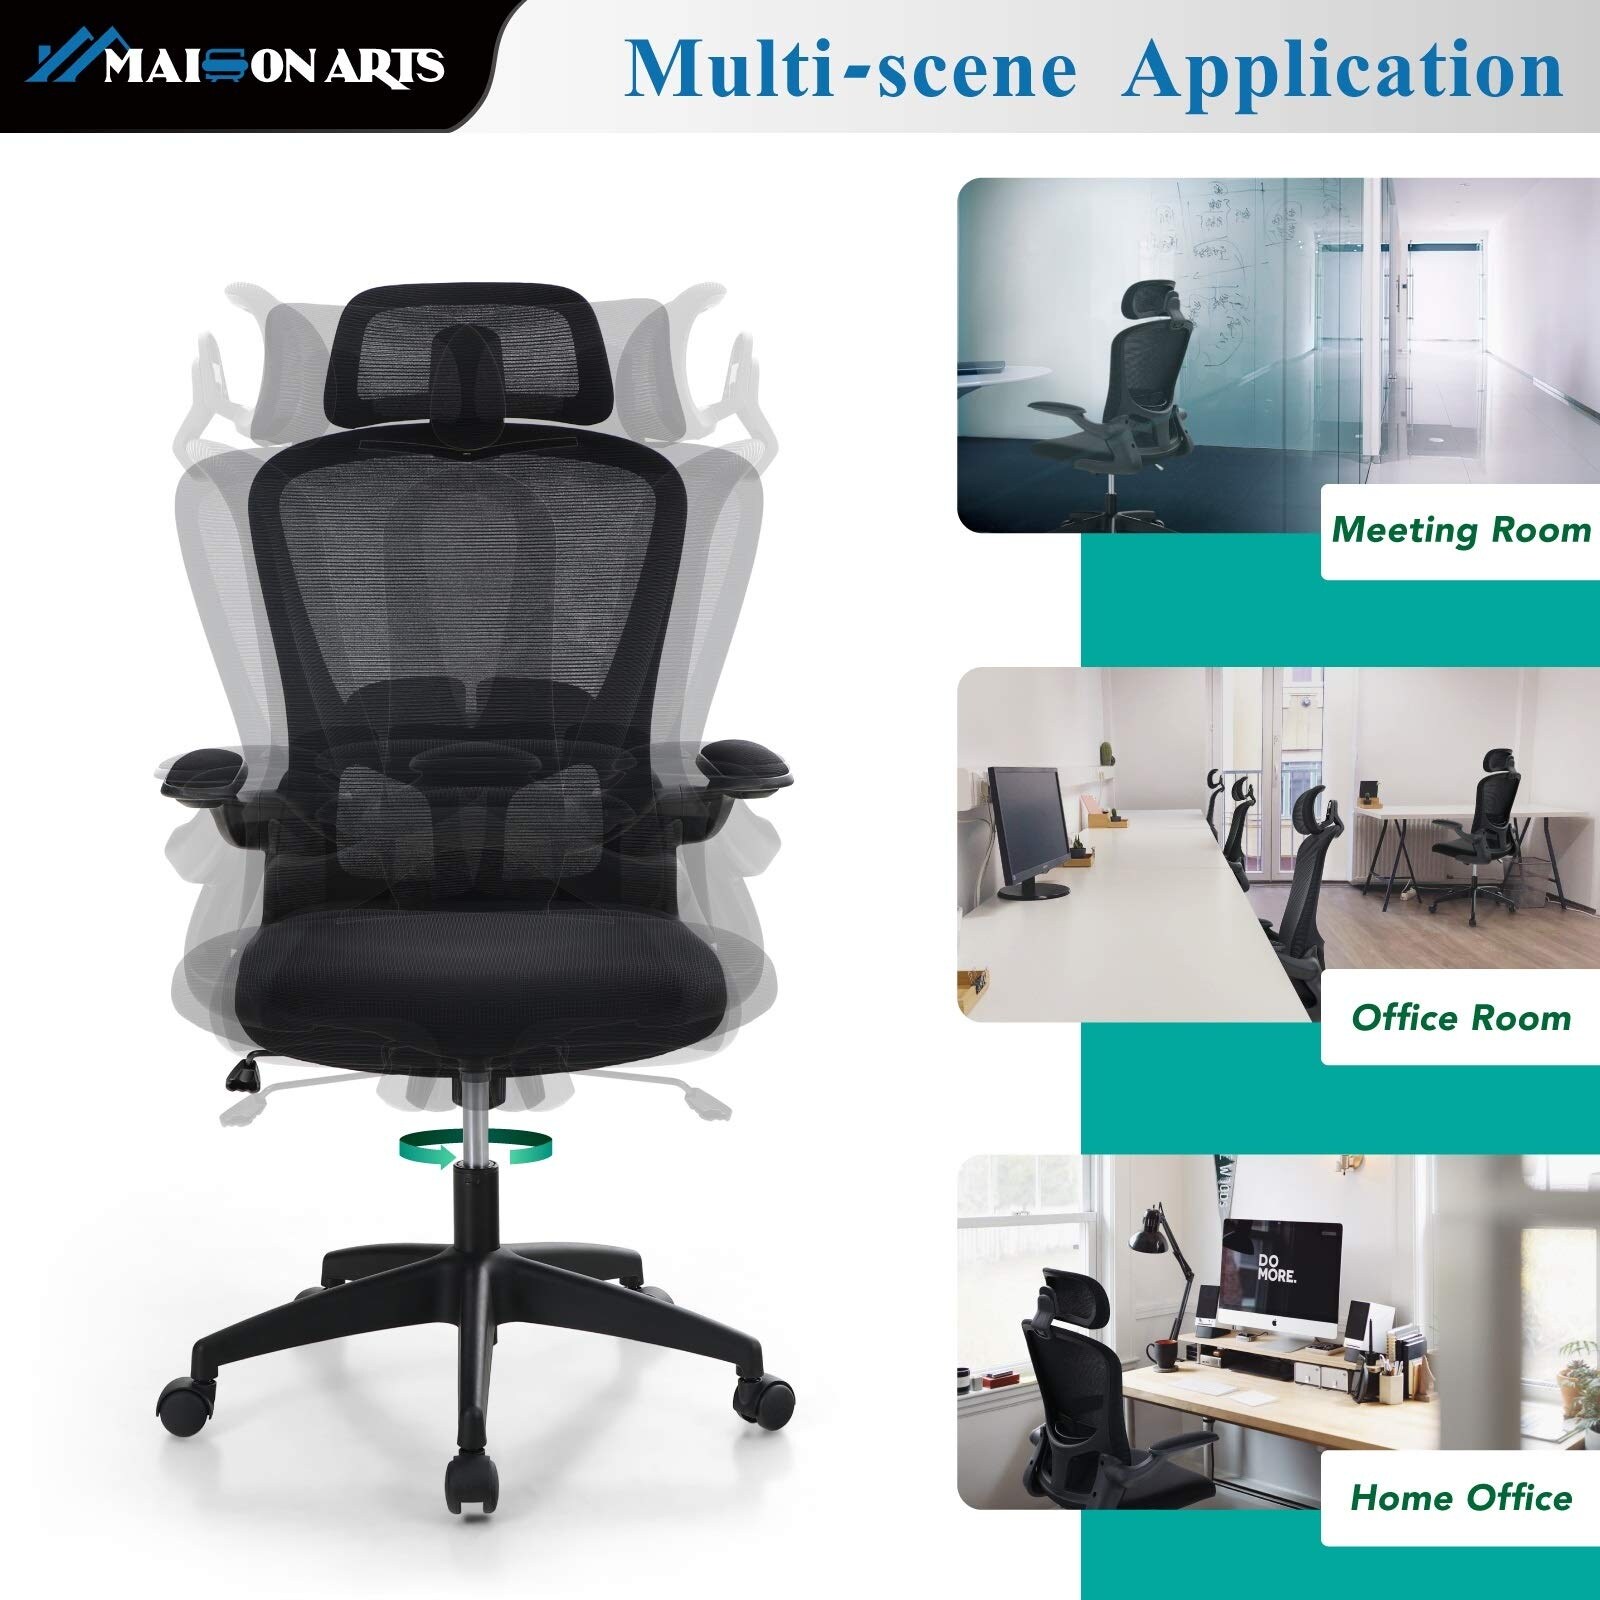 MAISON ARTS Ergonomic Mesh Office Chair, High Back Comfortable Task Chair,  Modern Desk Chair with Adjustable Lumbar Support and Headrest - Extra